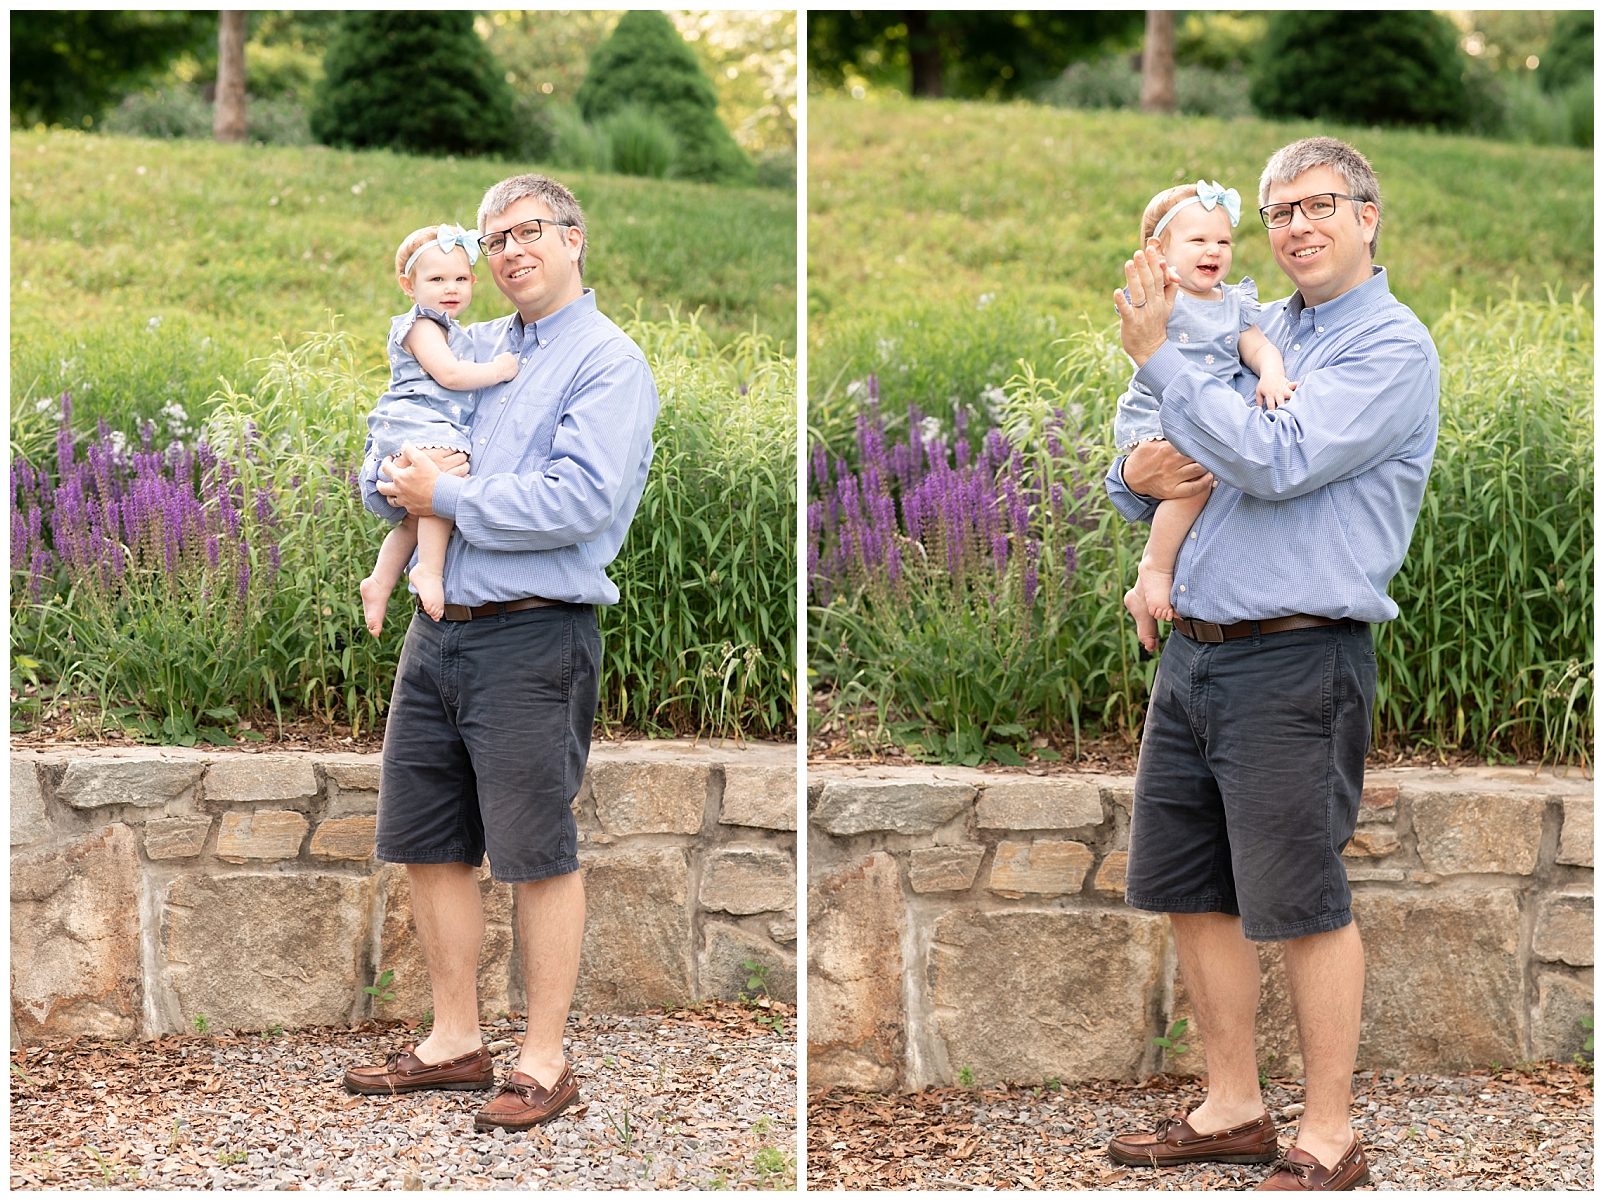 Dad holding daughter near a stone wall with purple flowers